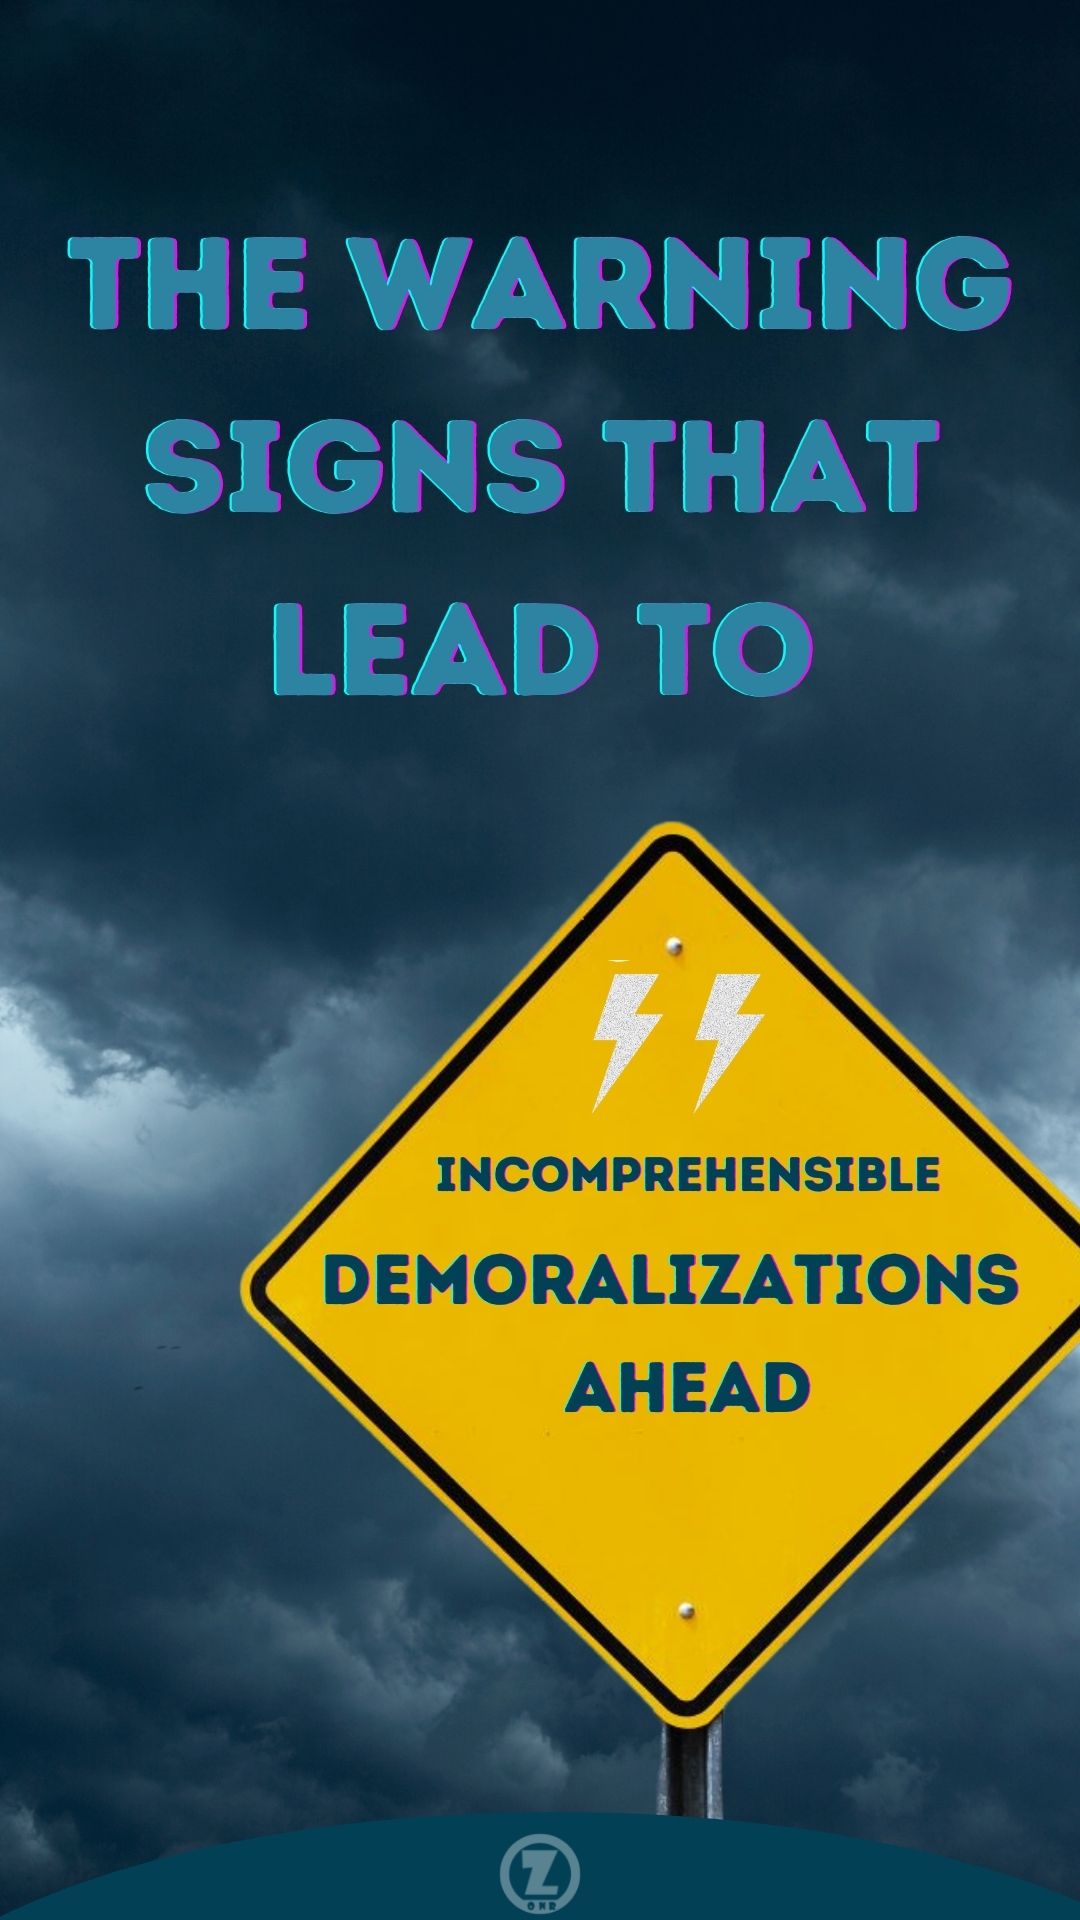 You are currently viewing The Warning Signs that Lead to “Incomprehensible Demoralization(s)” – Step 1